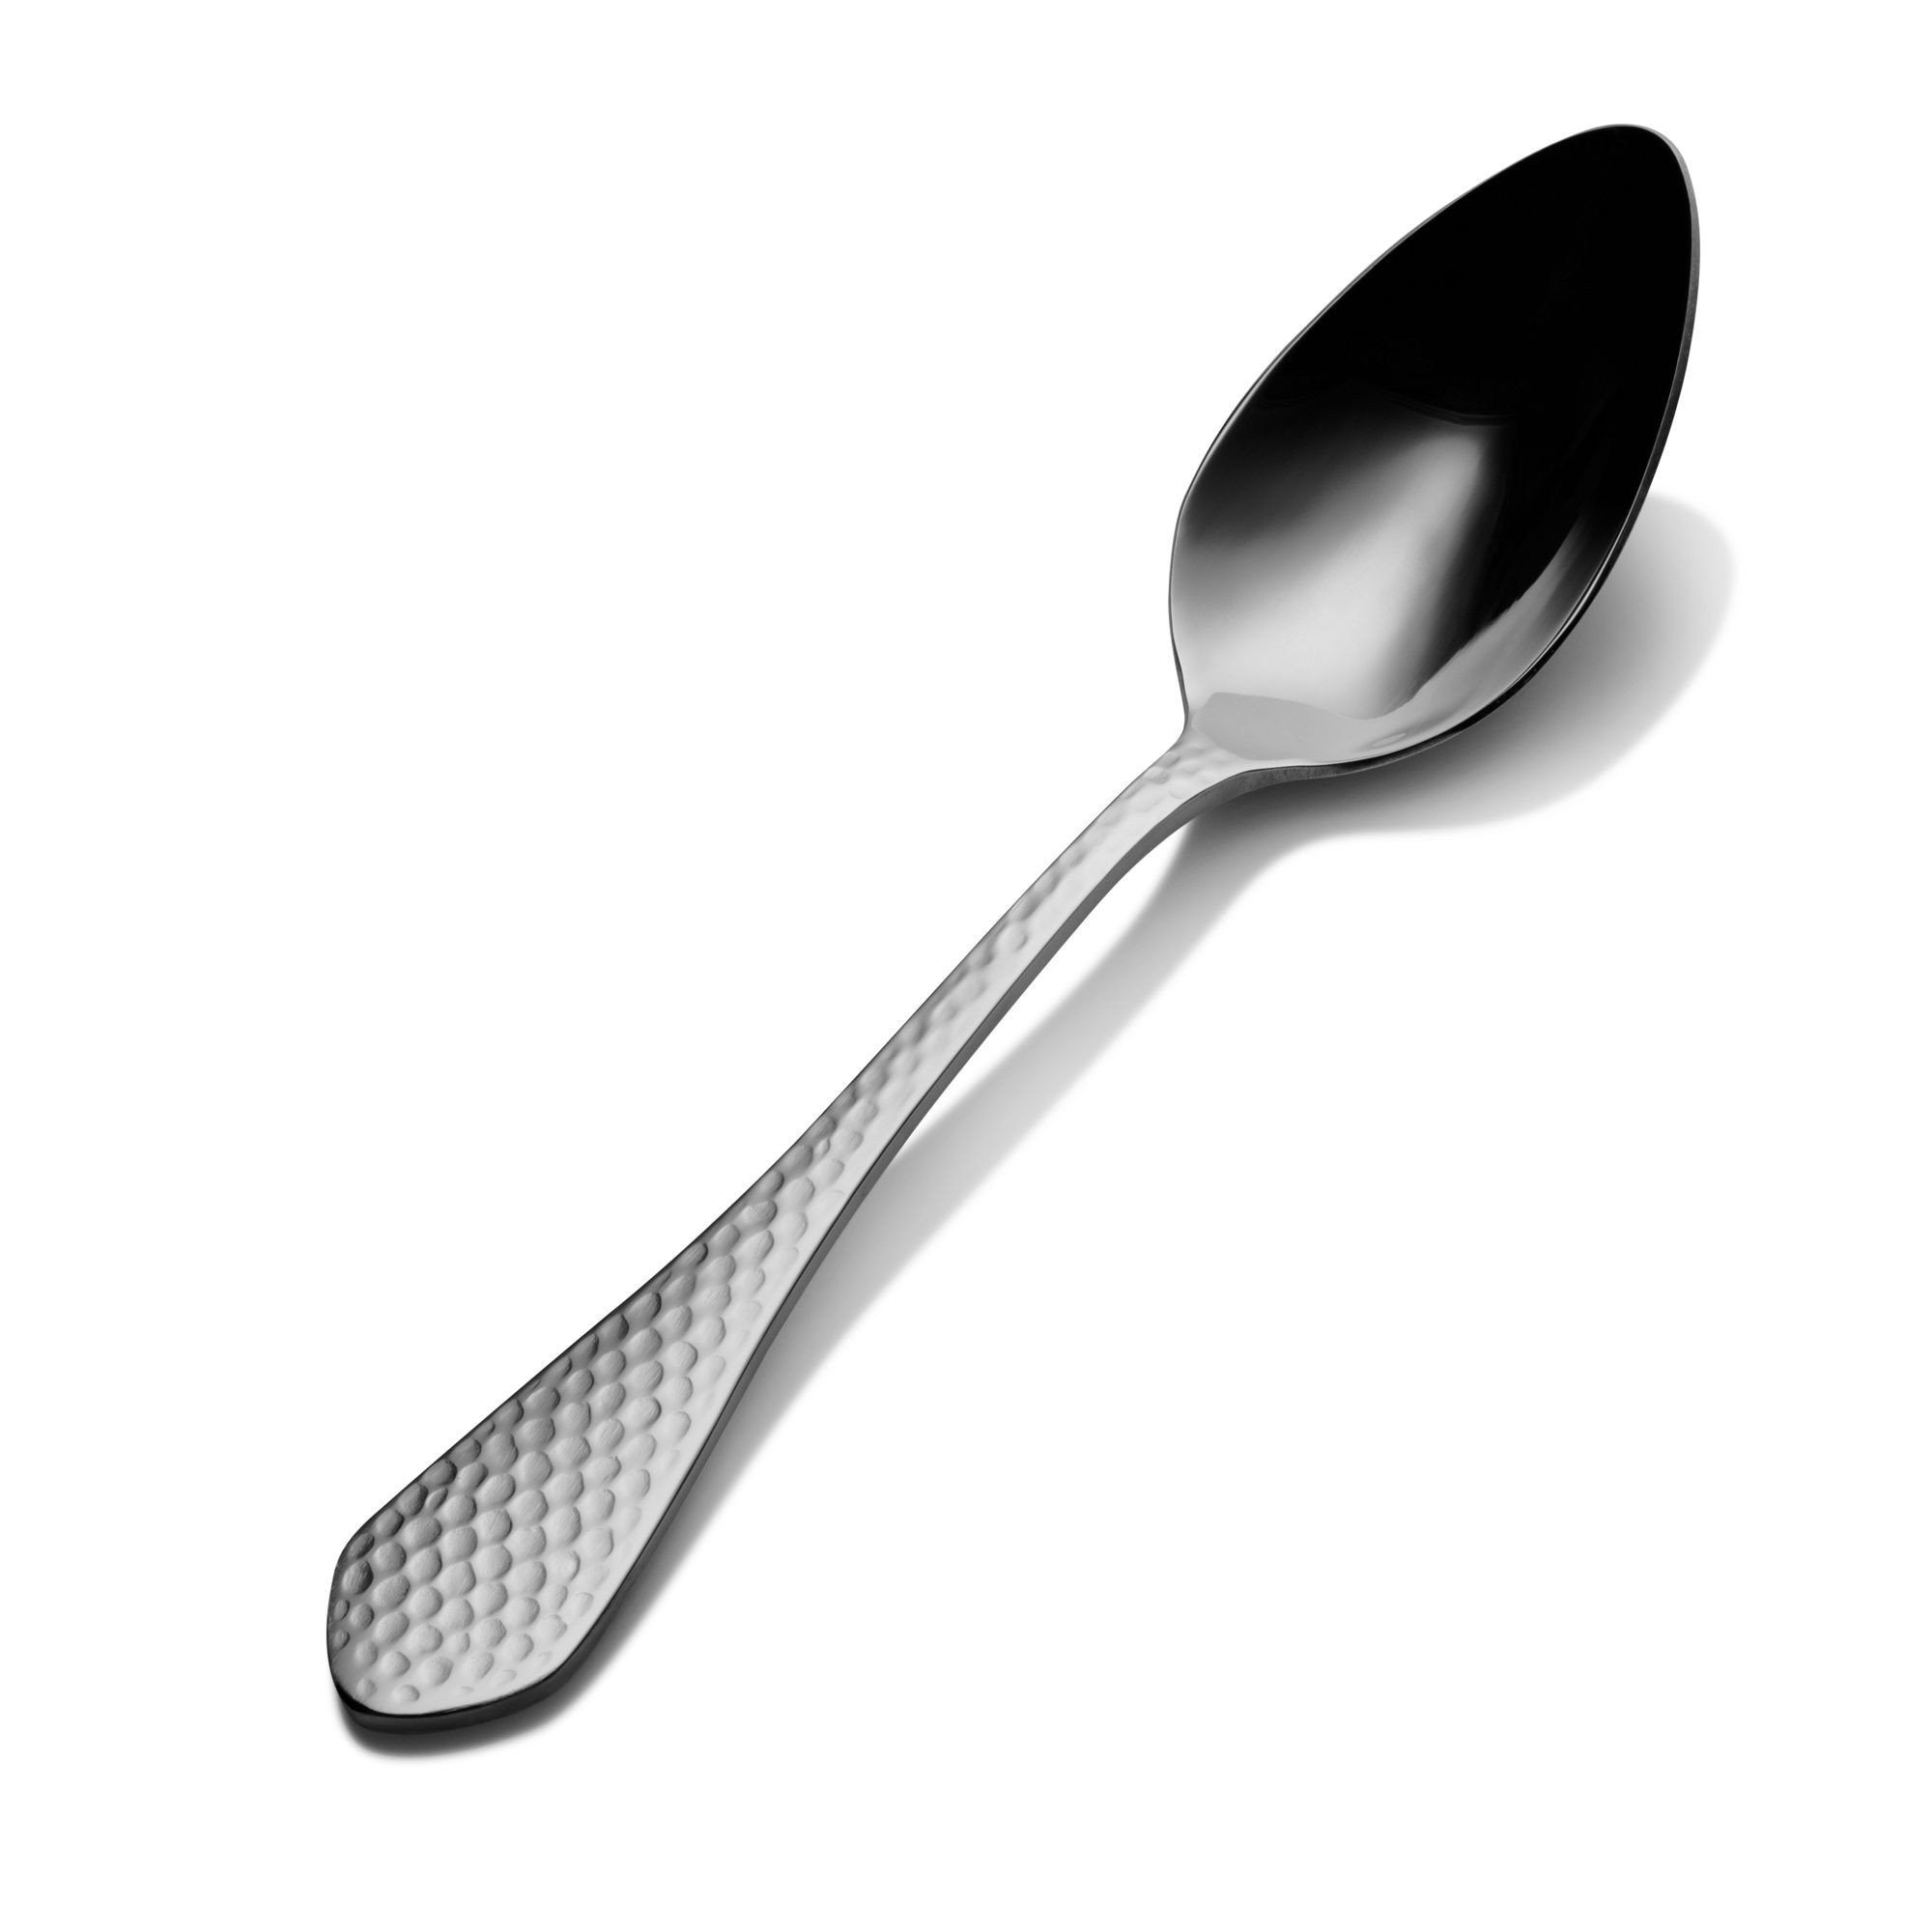 Bon Chef S1203S Reflections 18/8 Stainless Steel Silverplated Soup and Dessert Spoon